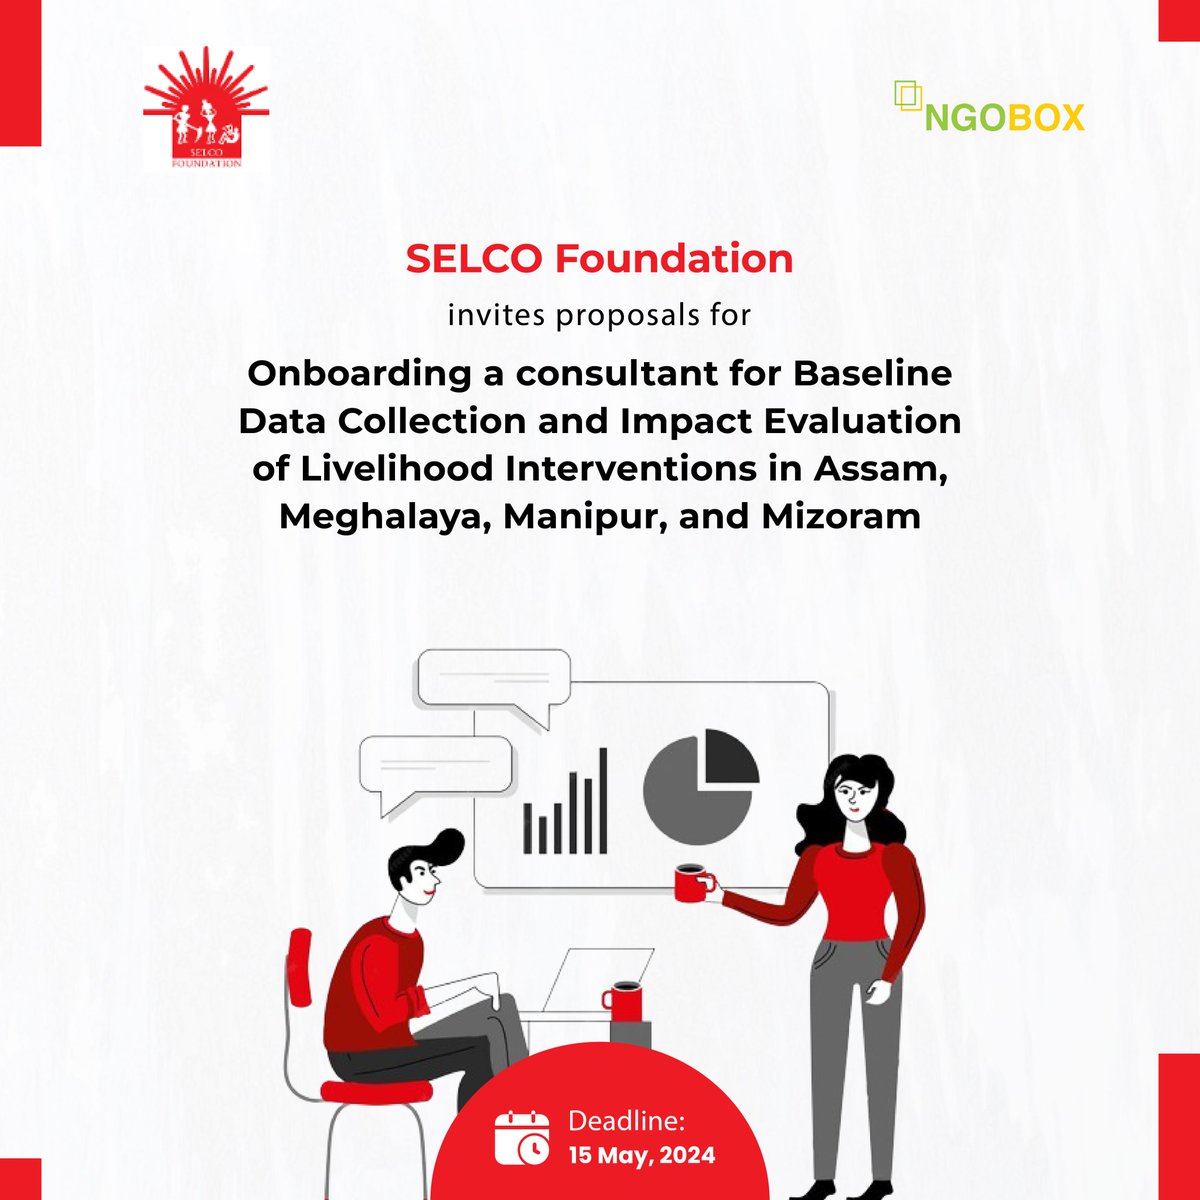 #ExpressionOfInterest @SELCOFoundation invites proposals for Onboarding a consultant for Baseline Data Collection and Impact Evaluation of Livelihood Interventions in Assam, Meghalaya, Manipur, and Mizoram Deadline: 15 May 2024 Apply: ngobox.org/full_rfp_eoi_T…